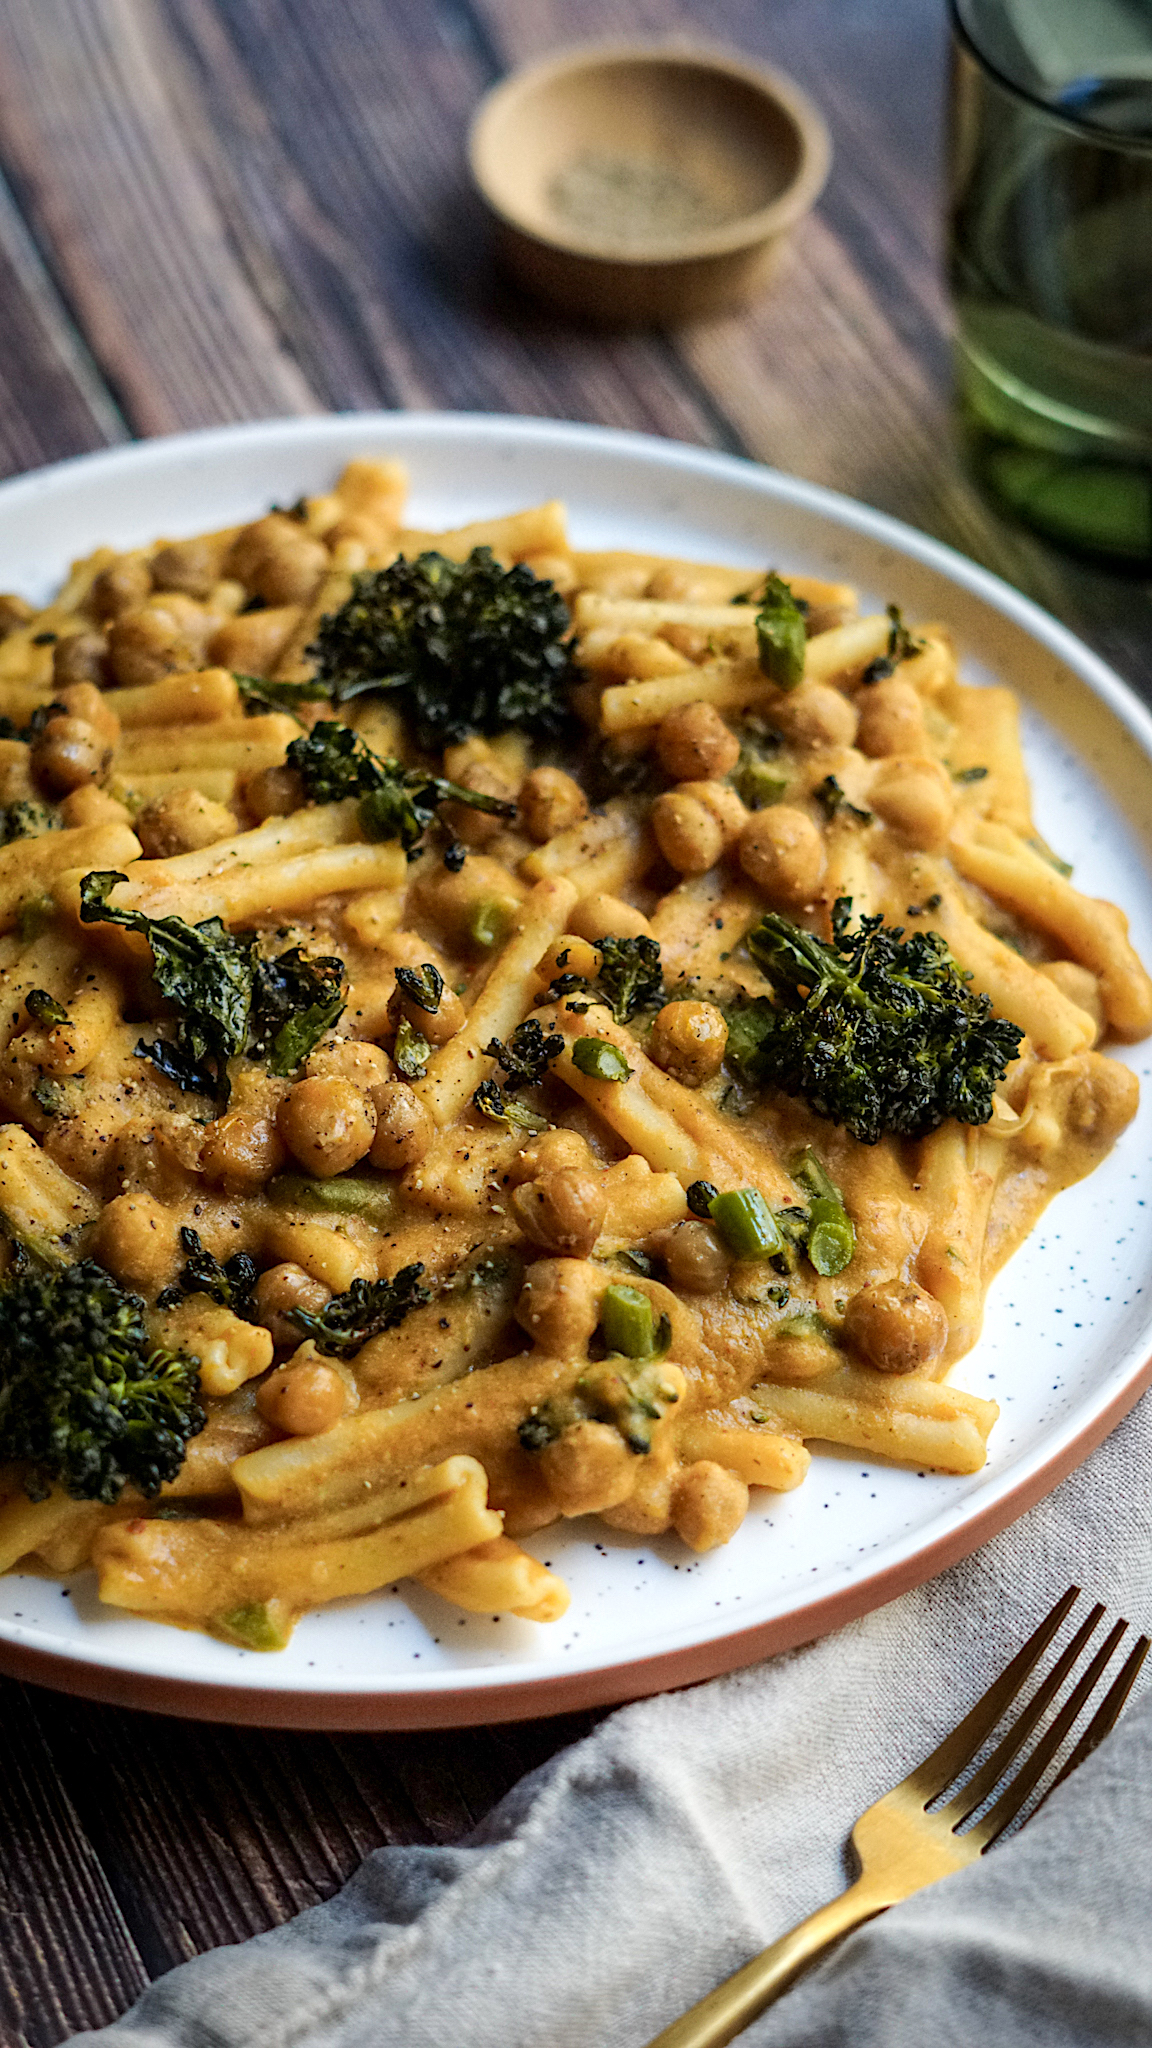 Spicy Pumpkin Pasta with Roasted Broccolini and Chickpeas